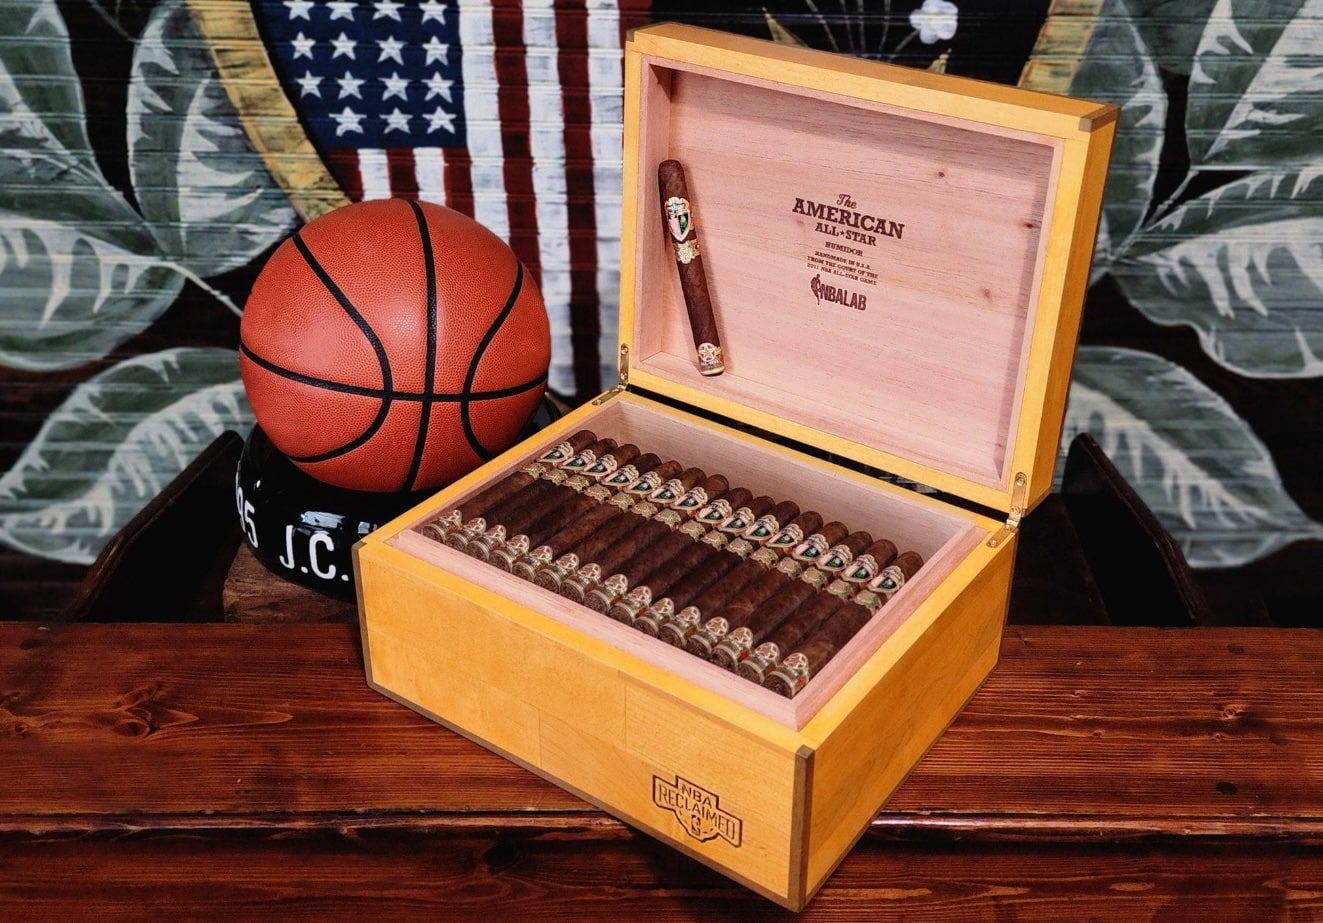 jc.-newman-shipping-the-american-all-star-humidor